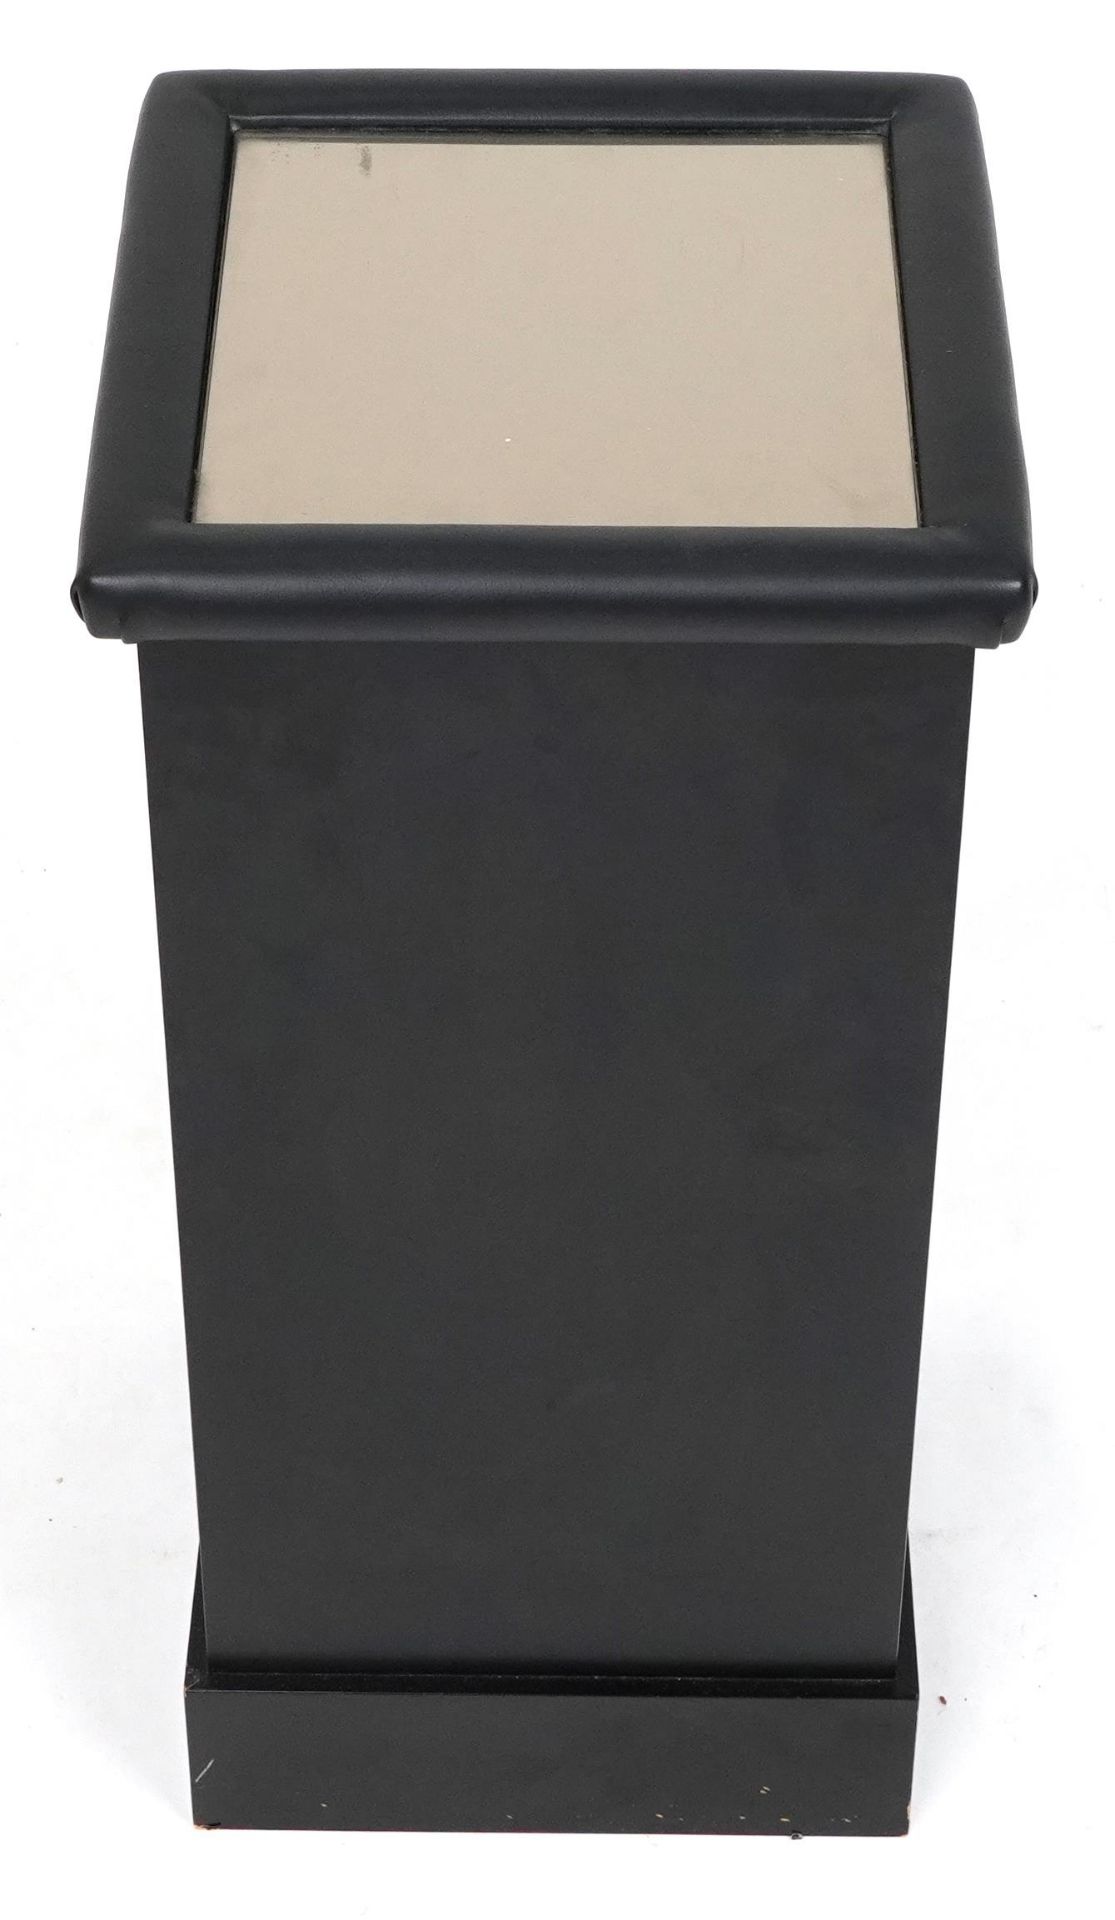 Contemporary ebonised and black leatherette column stand with mirrored top, 74cm H x 34cm W x 34cm D - Image 3 of 4